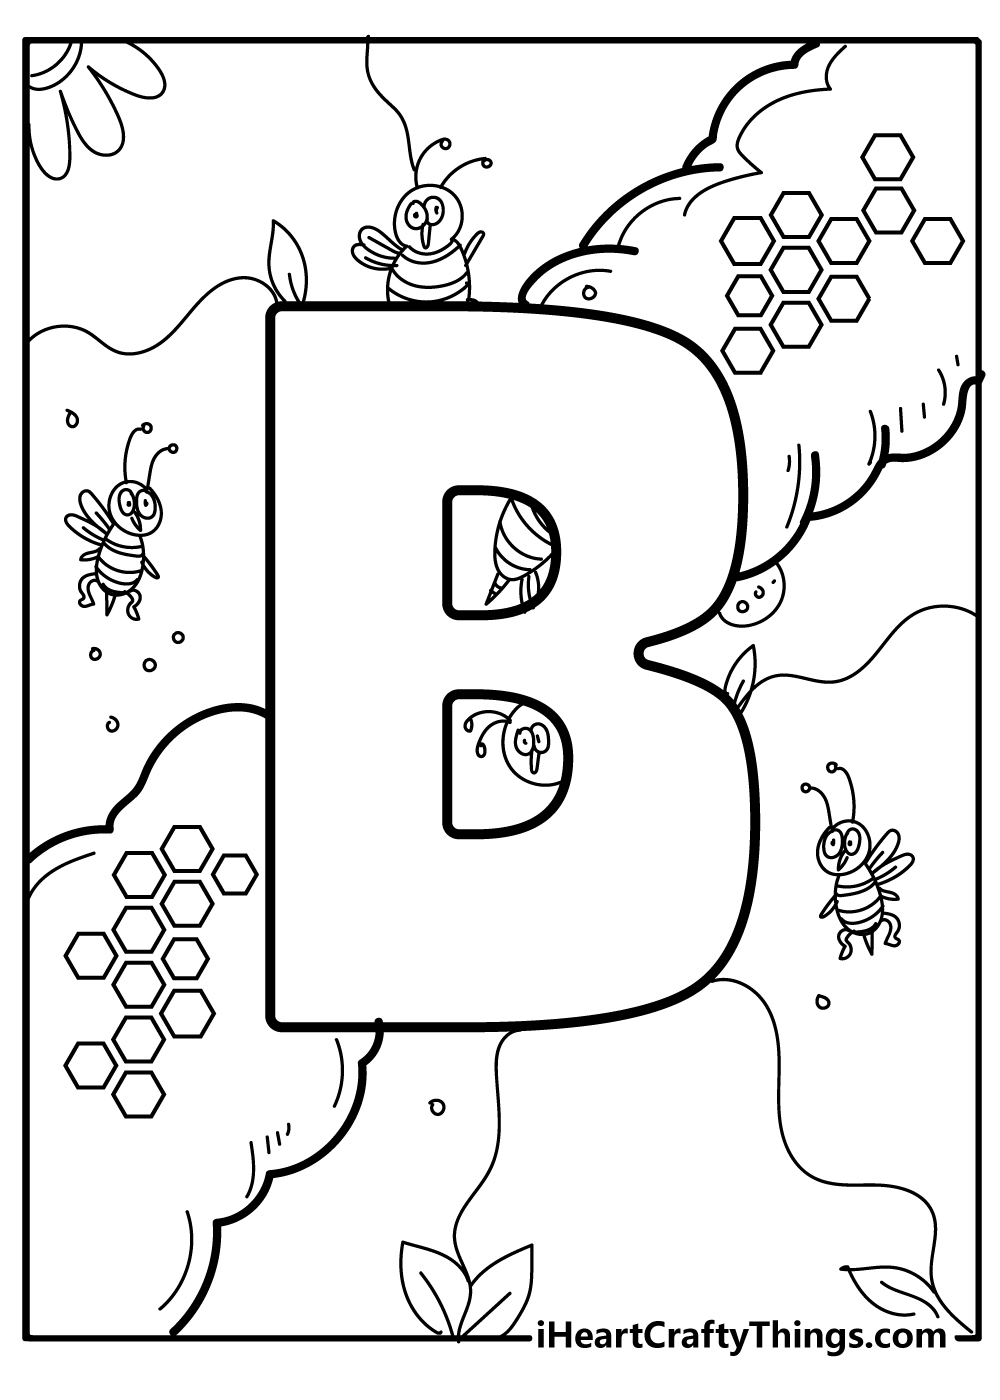 Letter B Coloring Book for adults free download